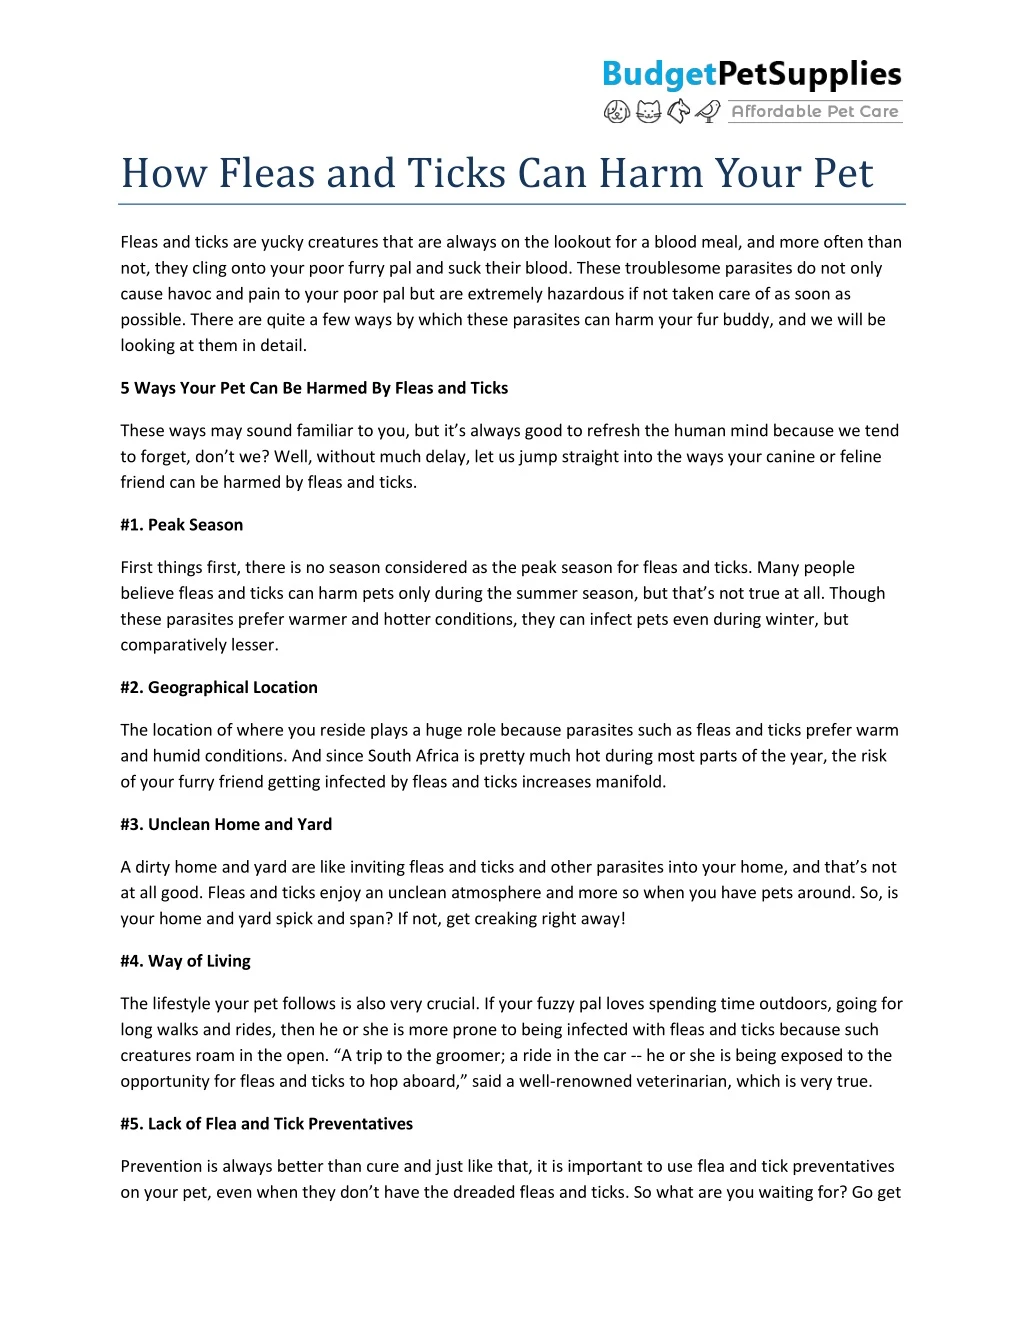 how fleas and ticks can harm your pet